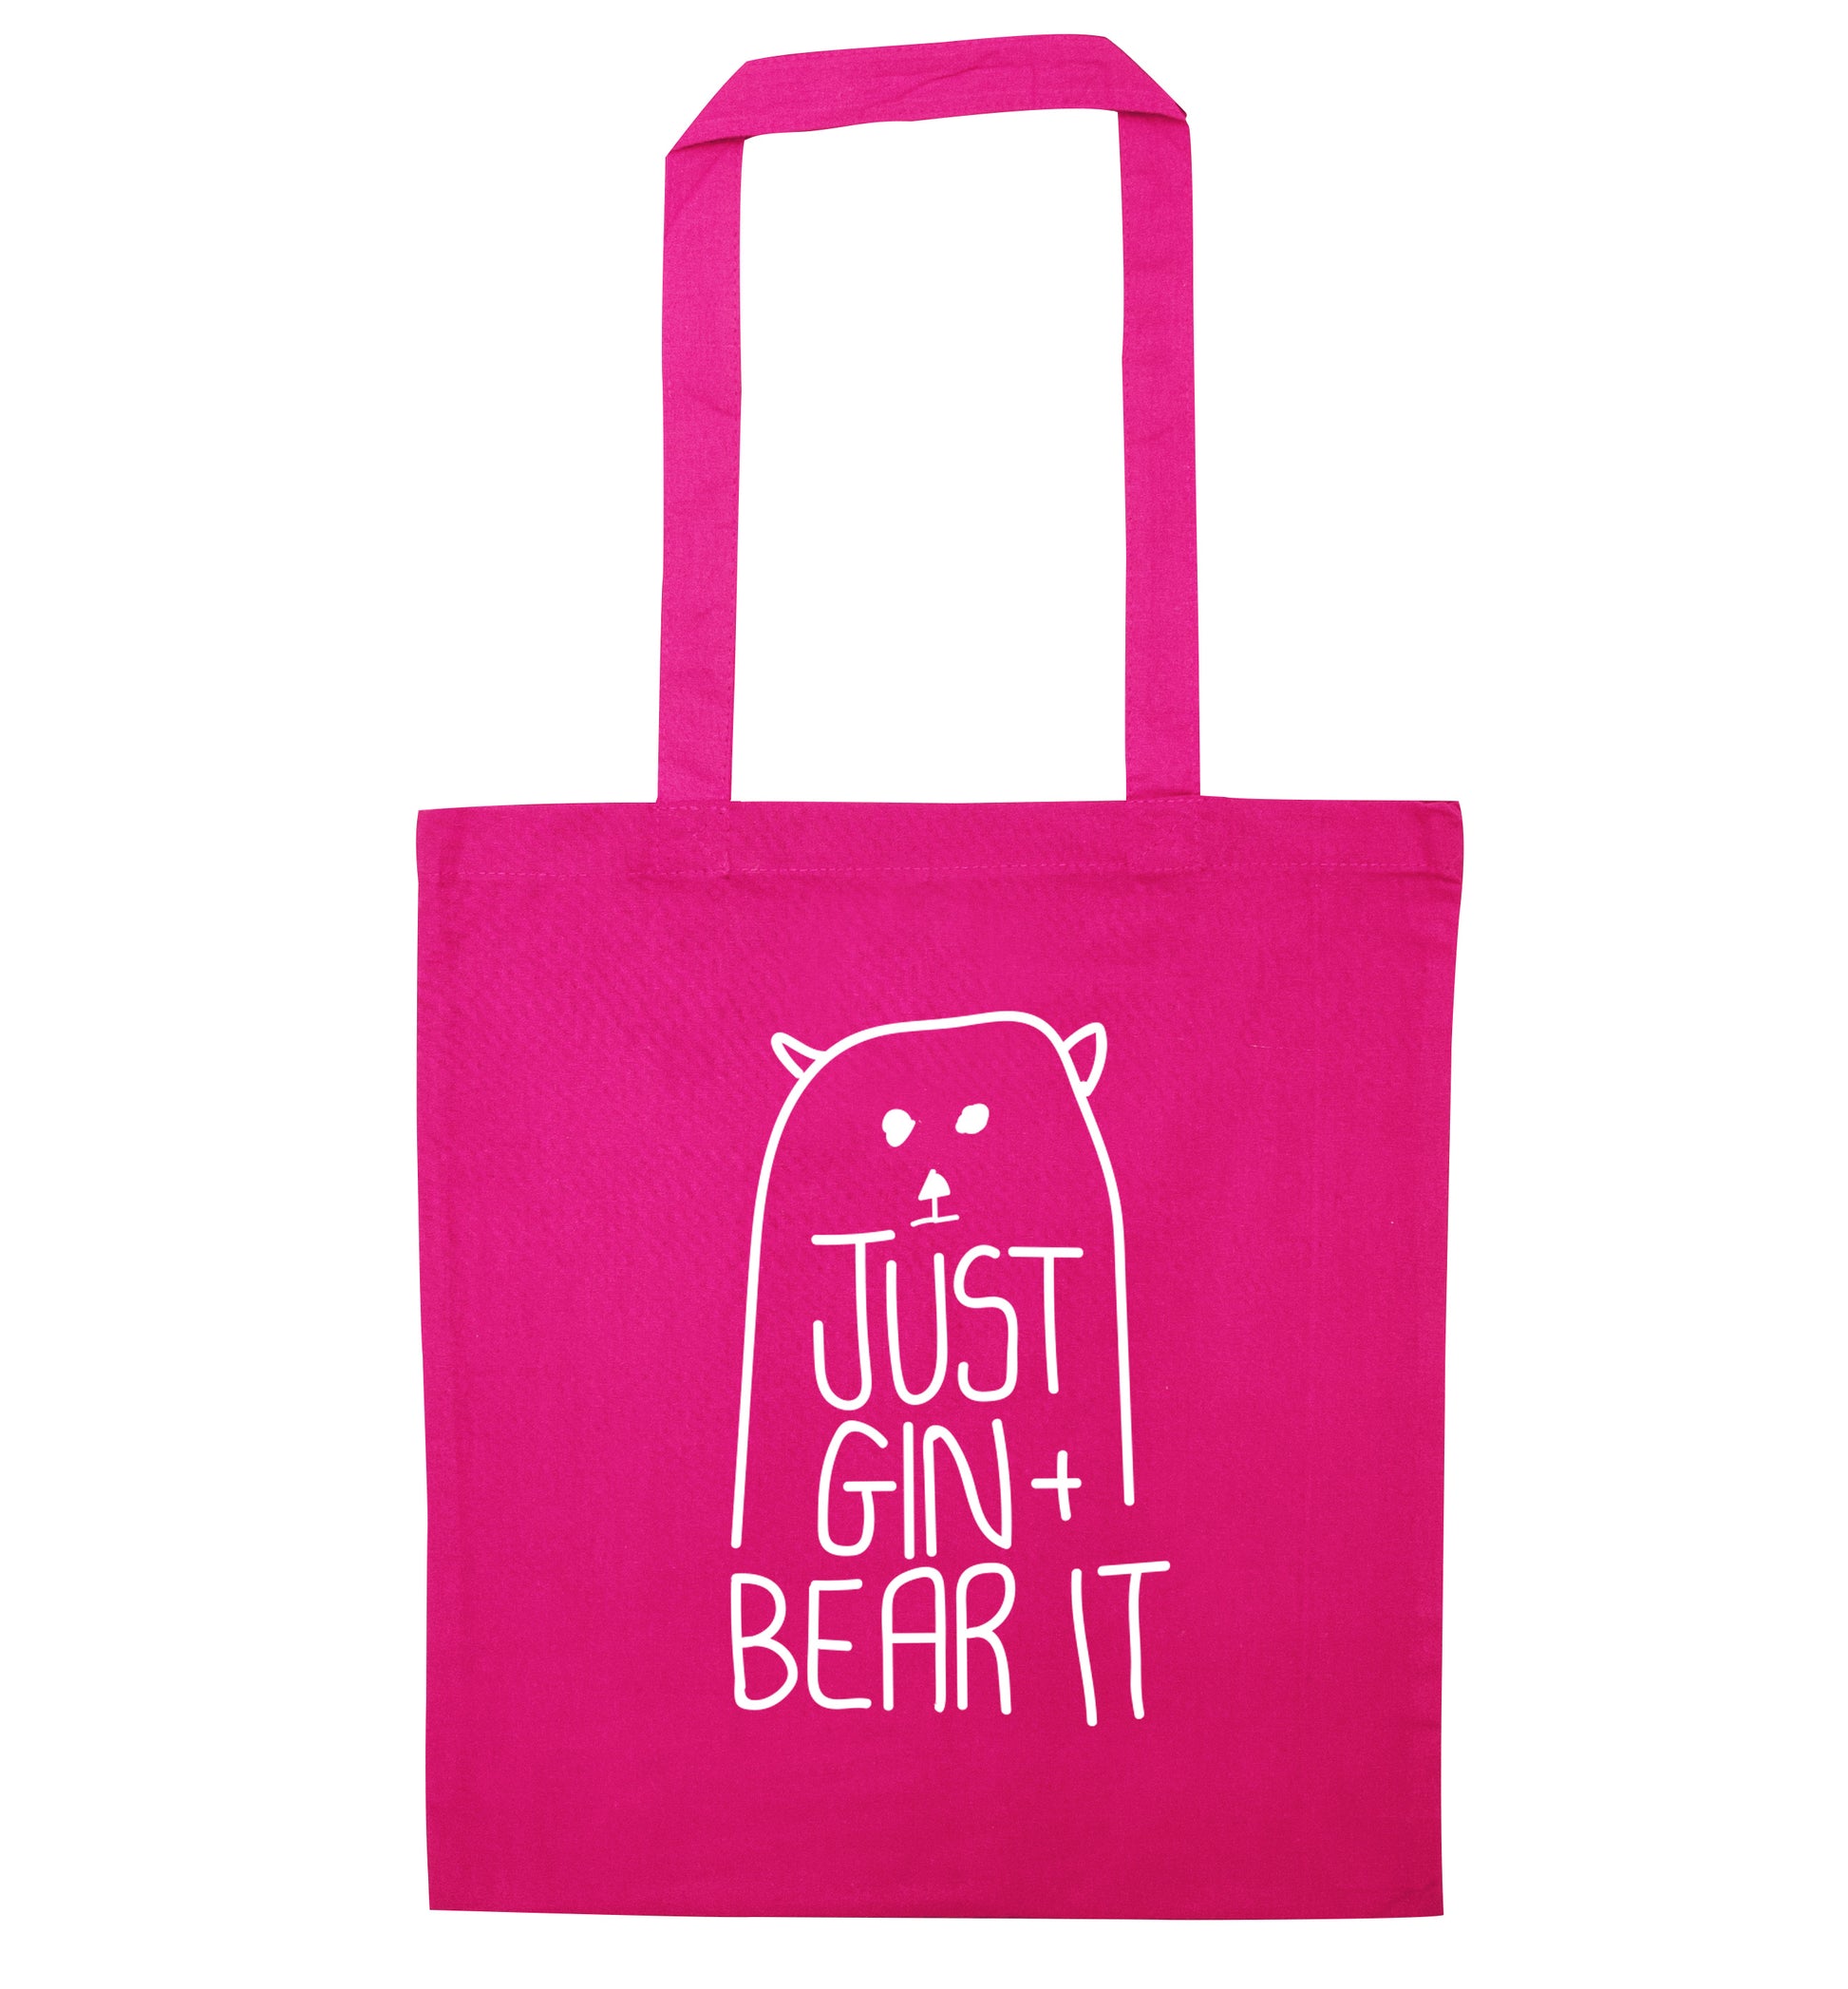 Just gin and bear it pink tote bag